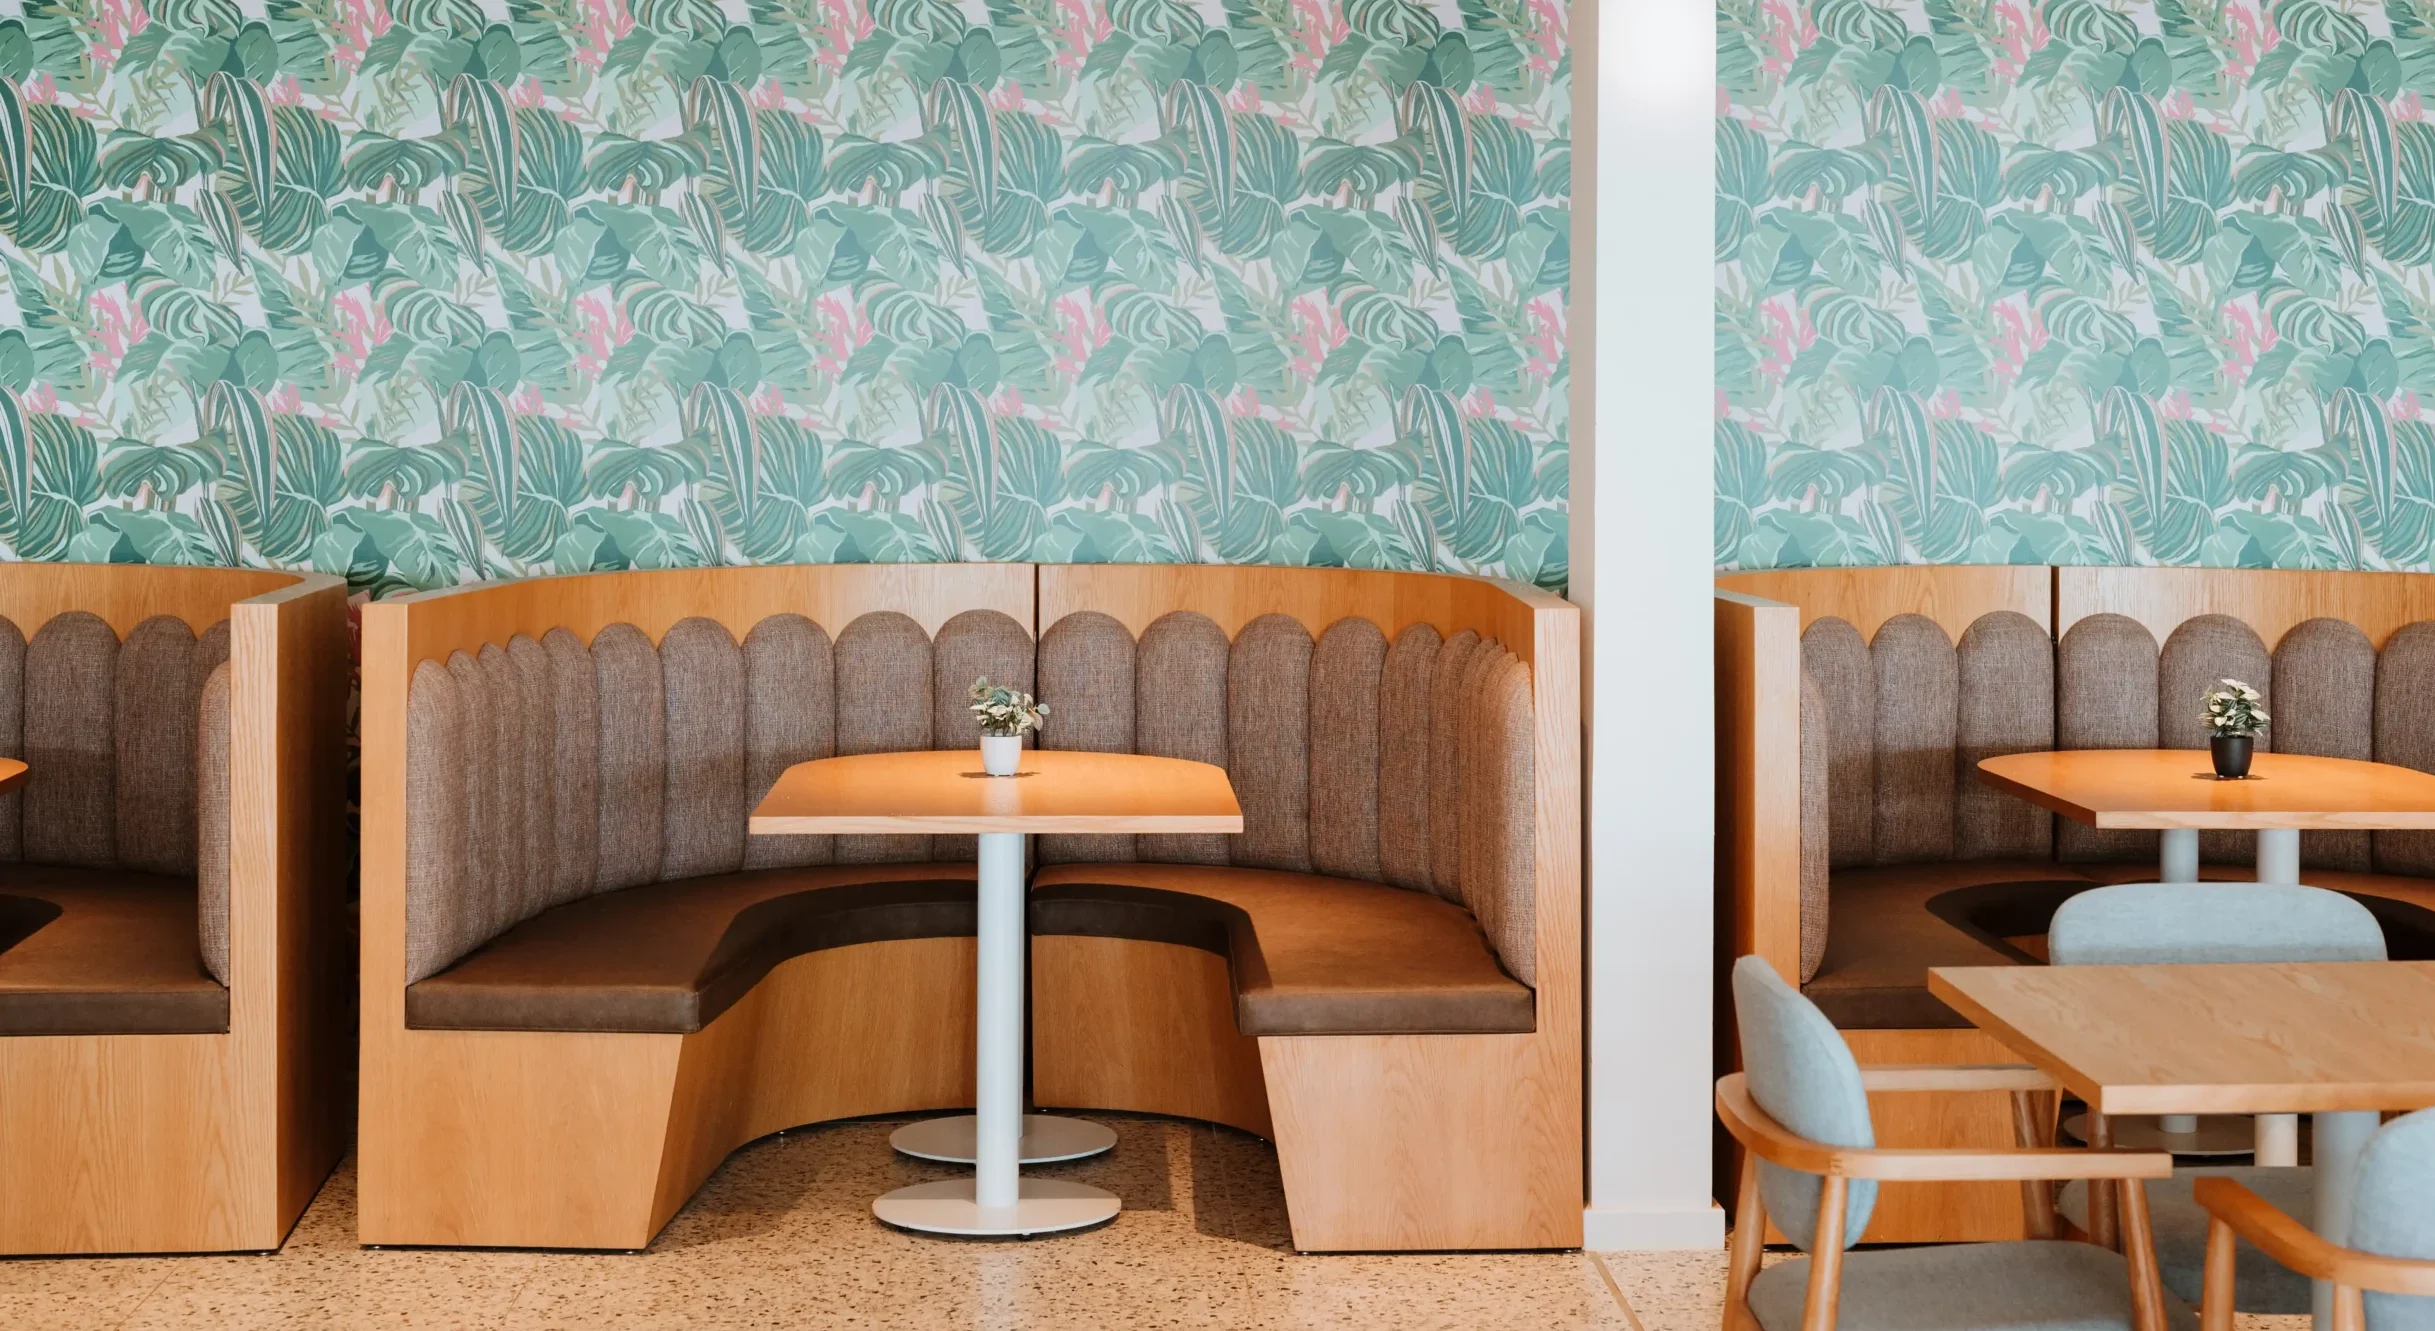 Booth seating for interior dining at the hedland hotel the brown of the booths is contrasted against tropical wallpaper